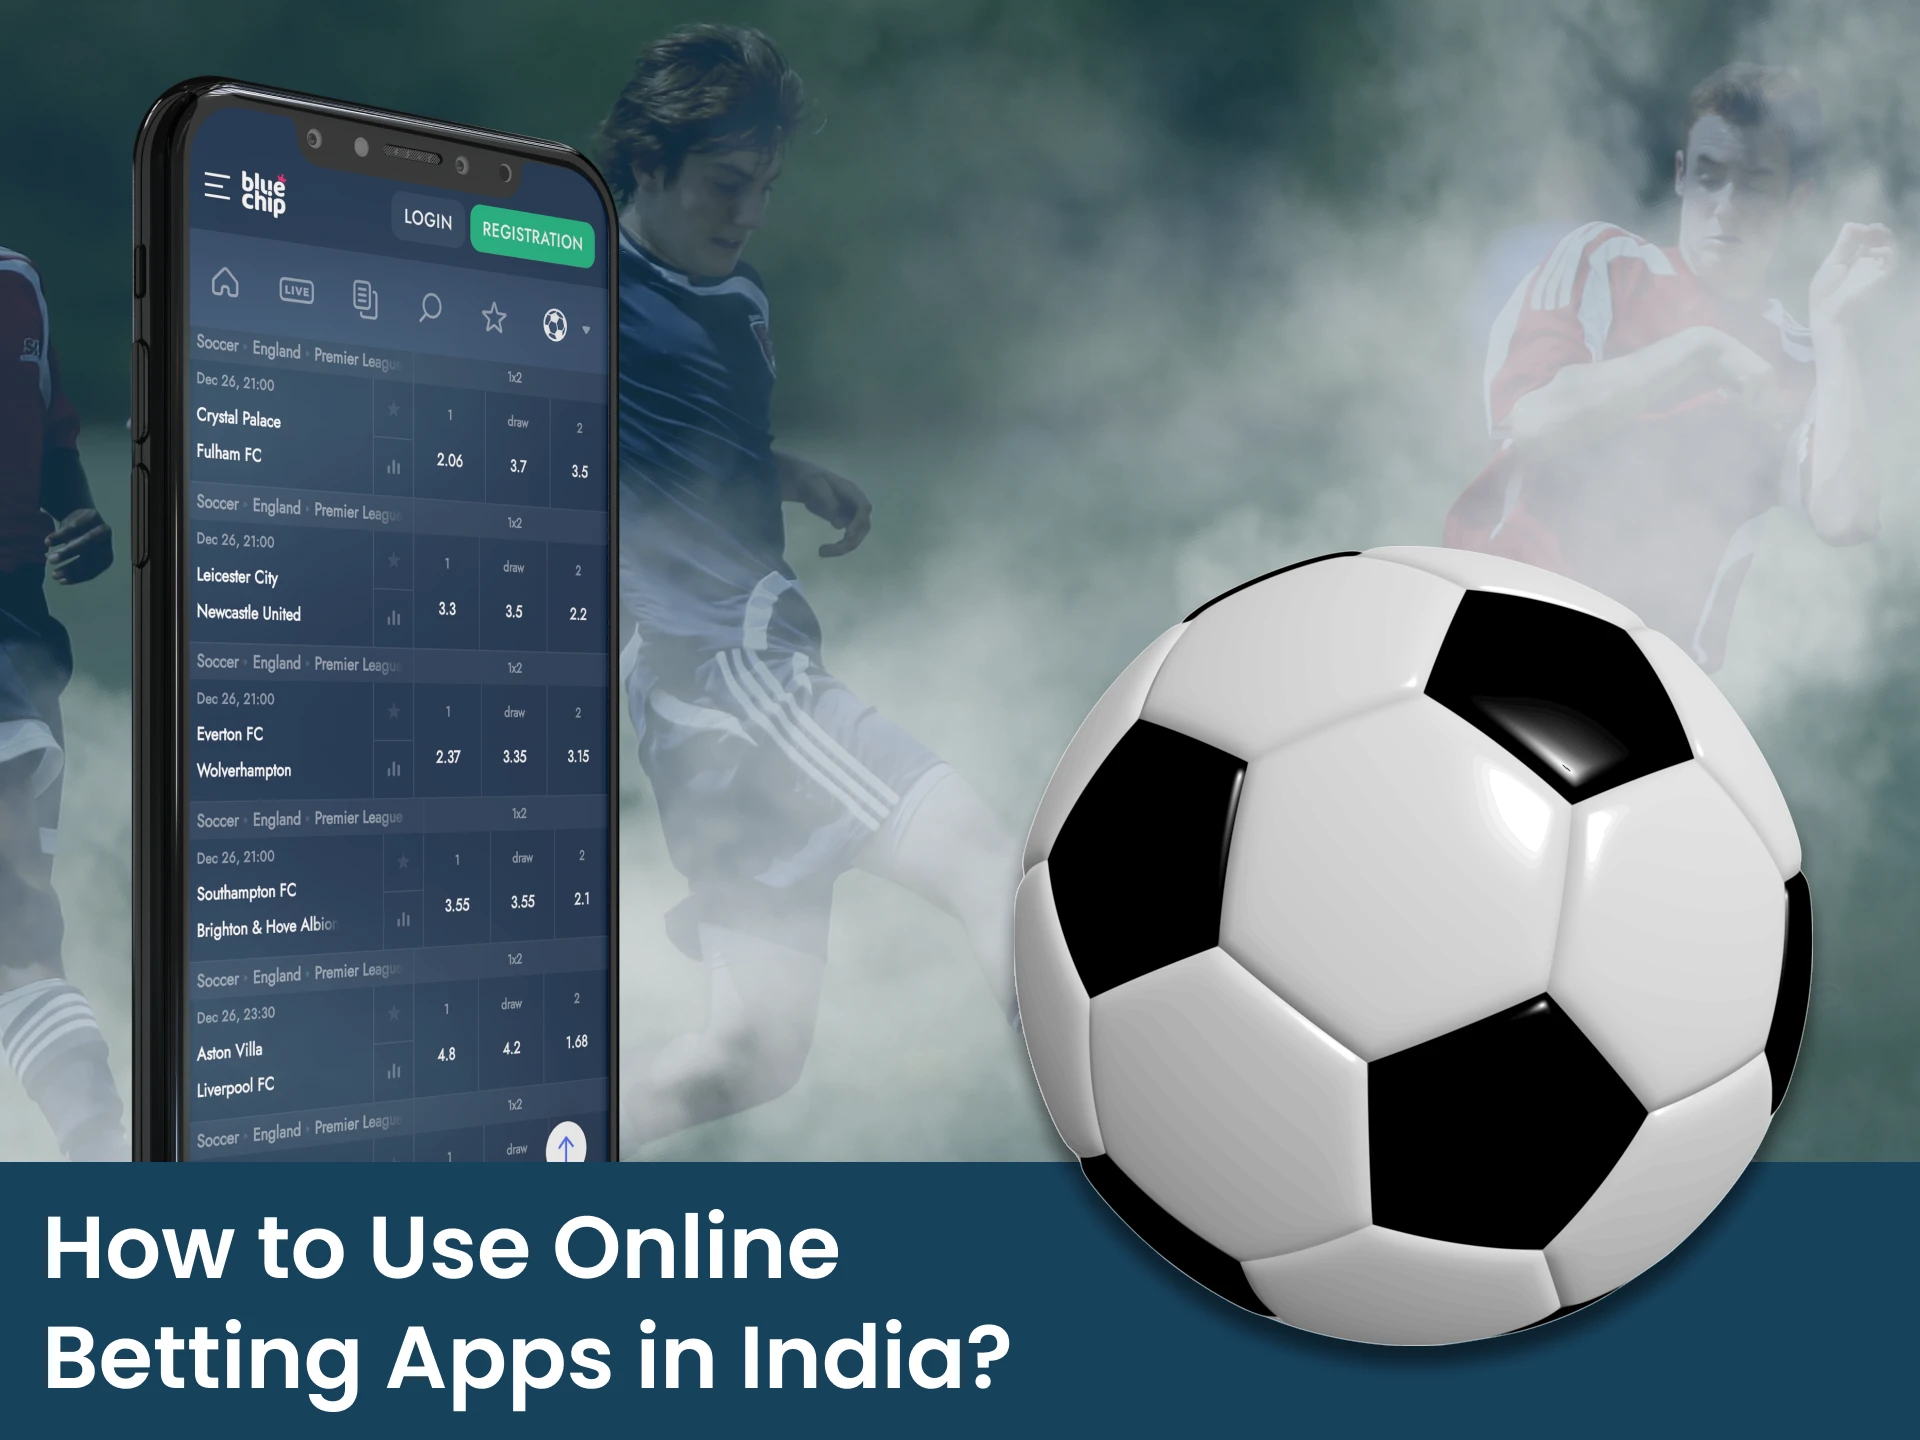 Download the app, create an account and start betting on football.